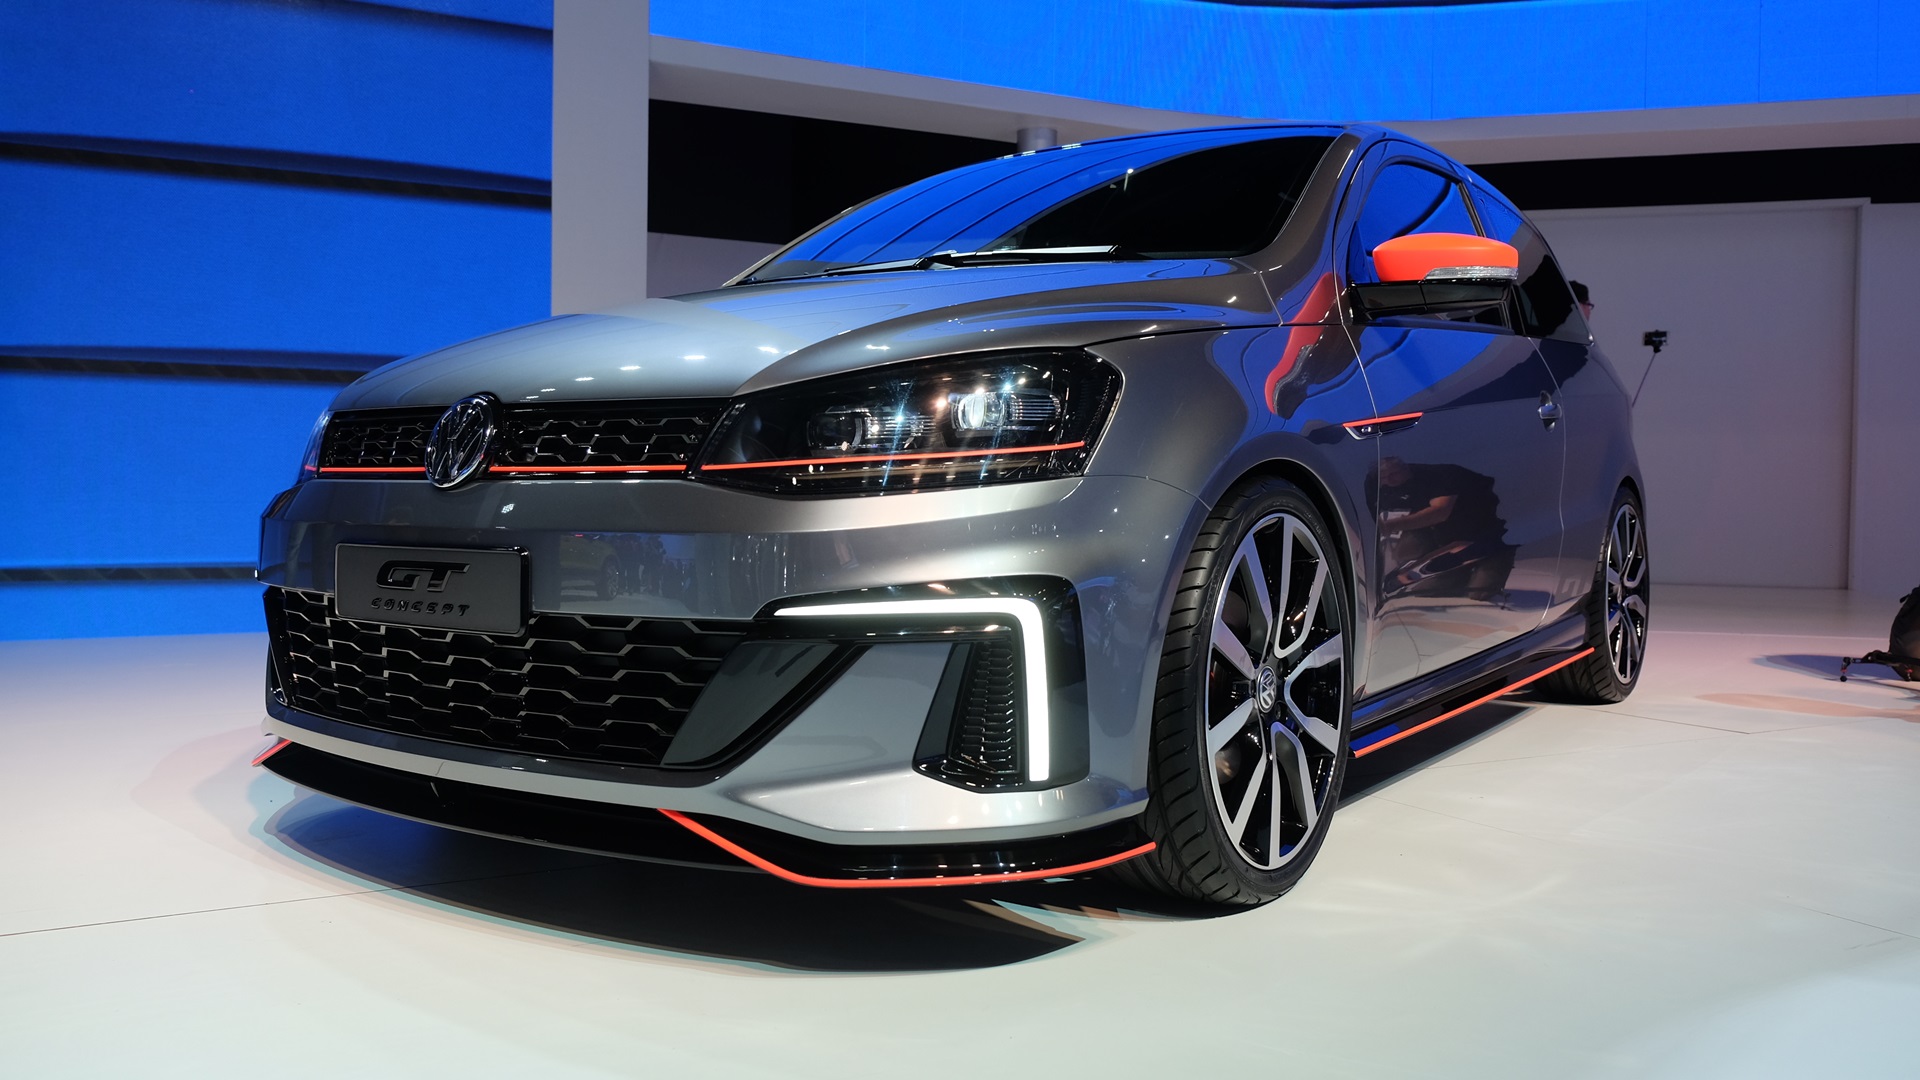 VW Gol GT Concept unveiled at the 2016 Sao Paulo Auto Show